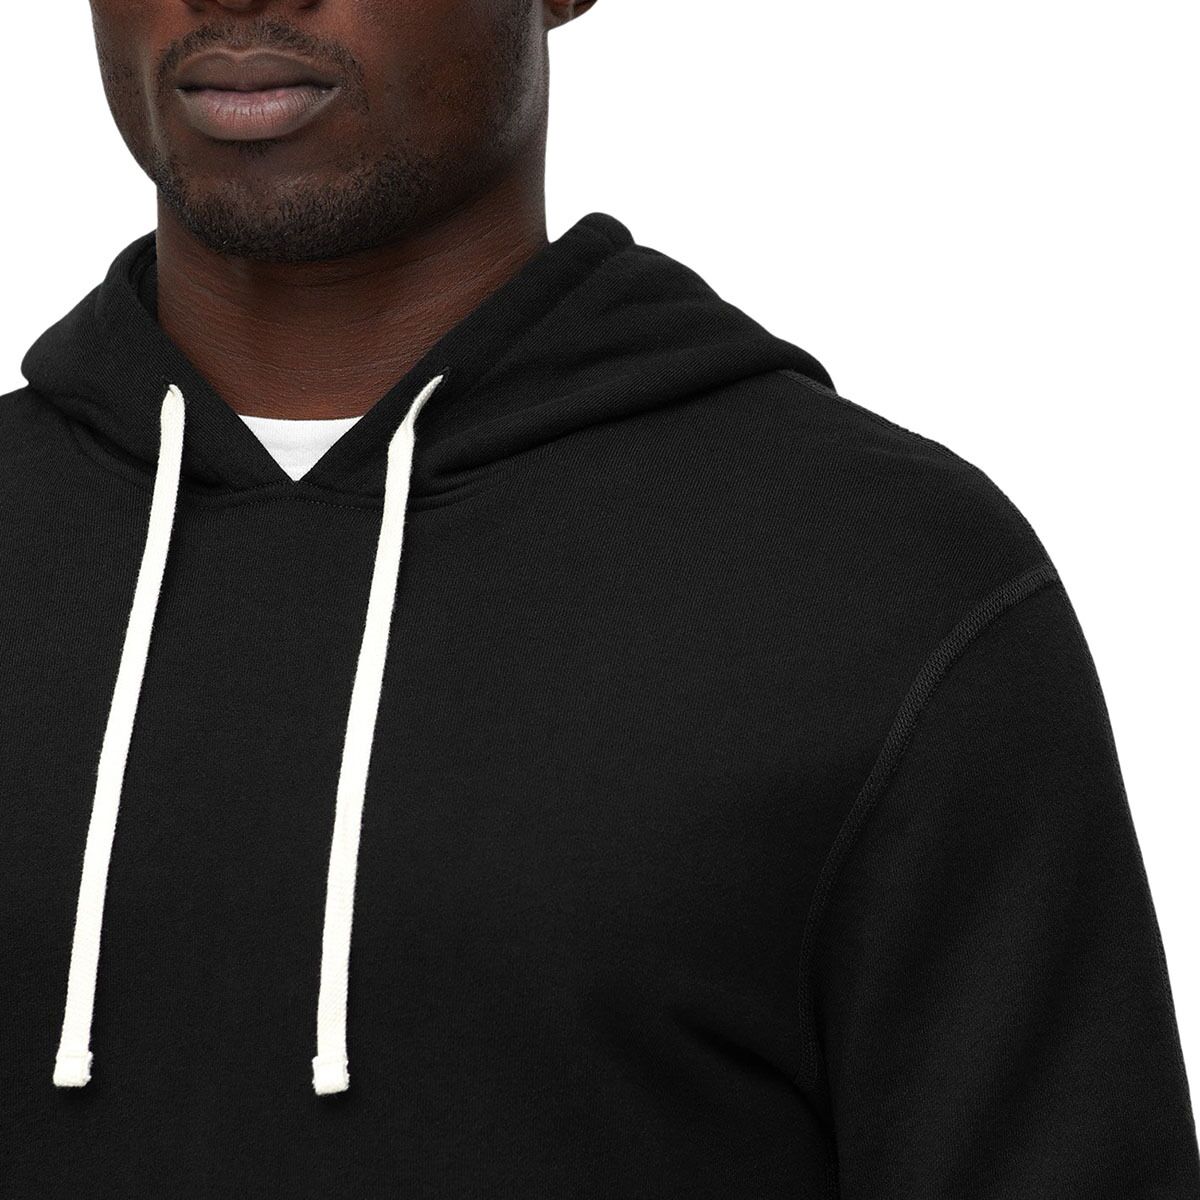 Reigning Champ Pullover Hoodie / Reigning Champ Knit Mid Wt Terry ...